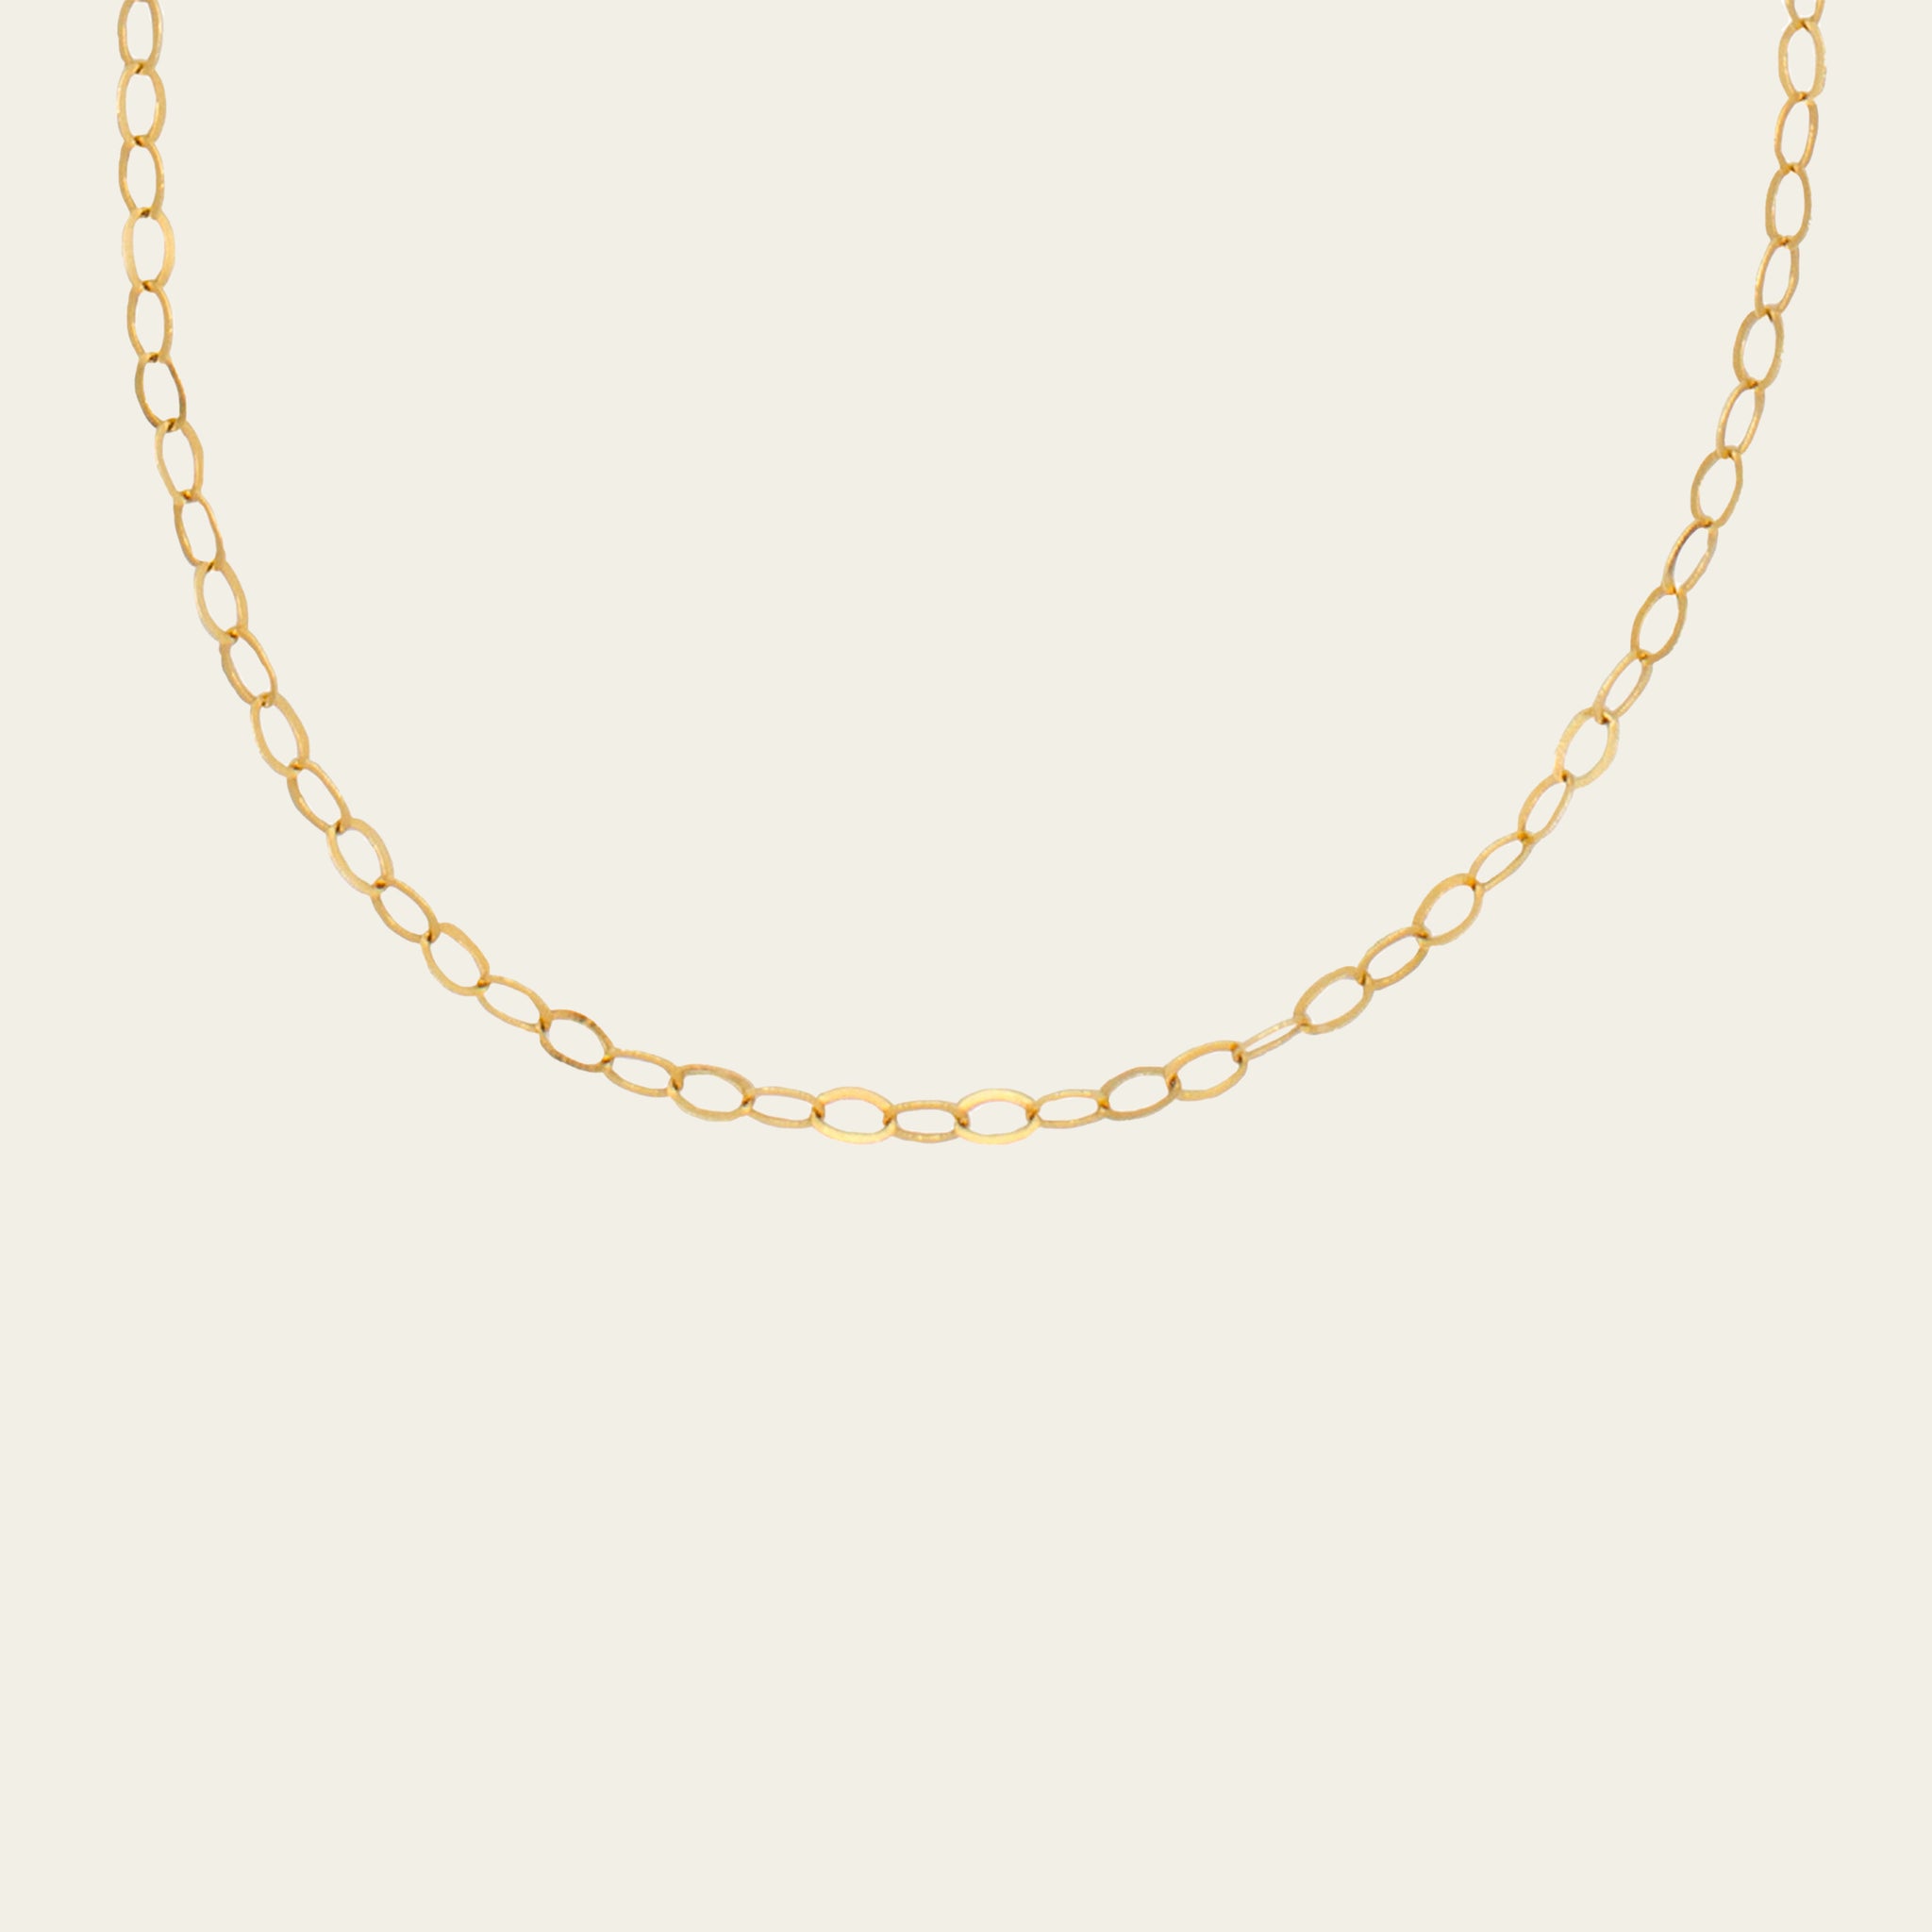 real gold chain necklace